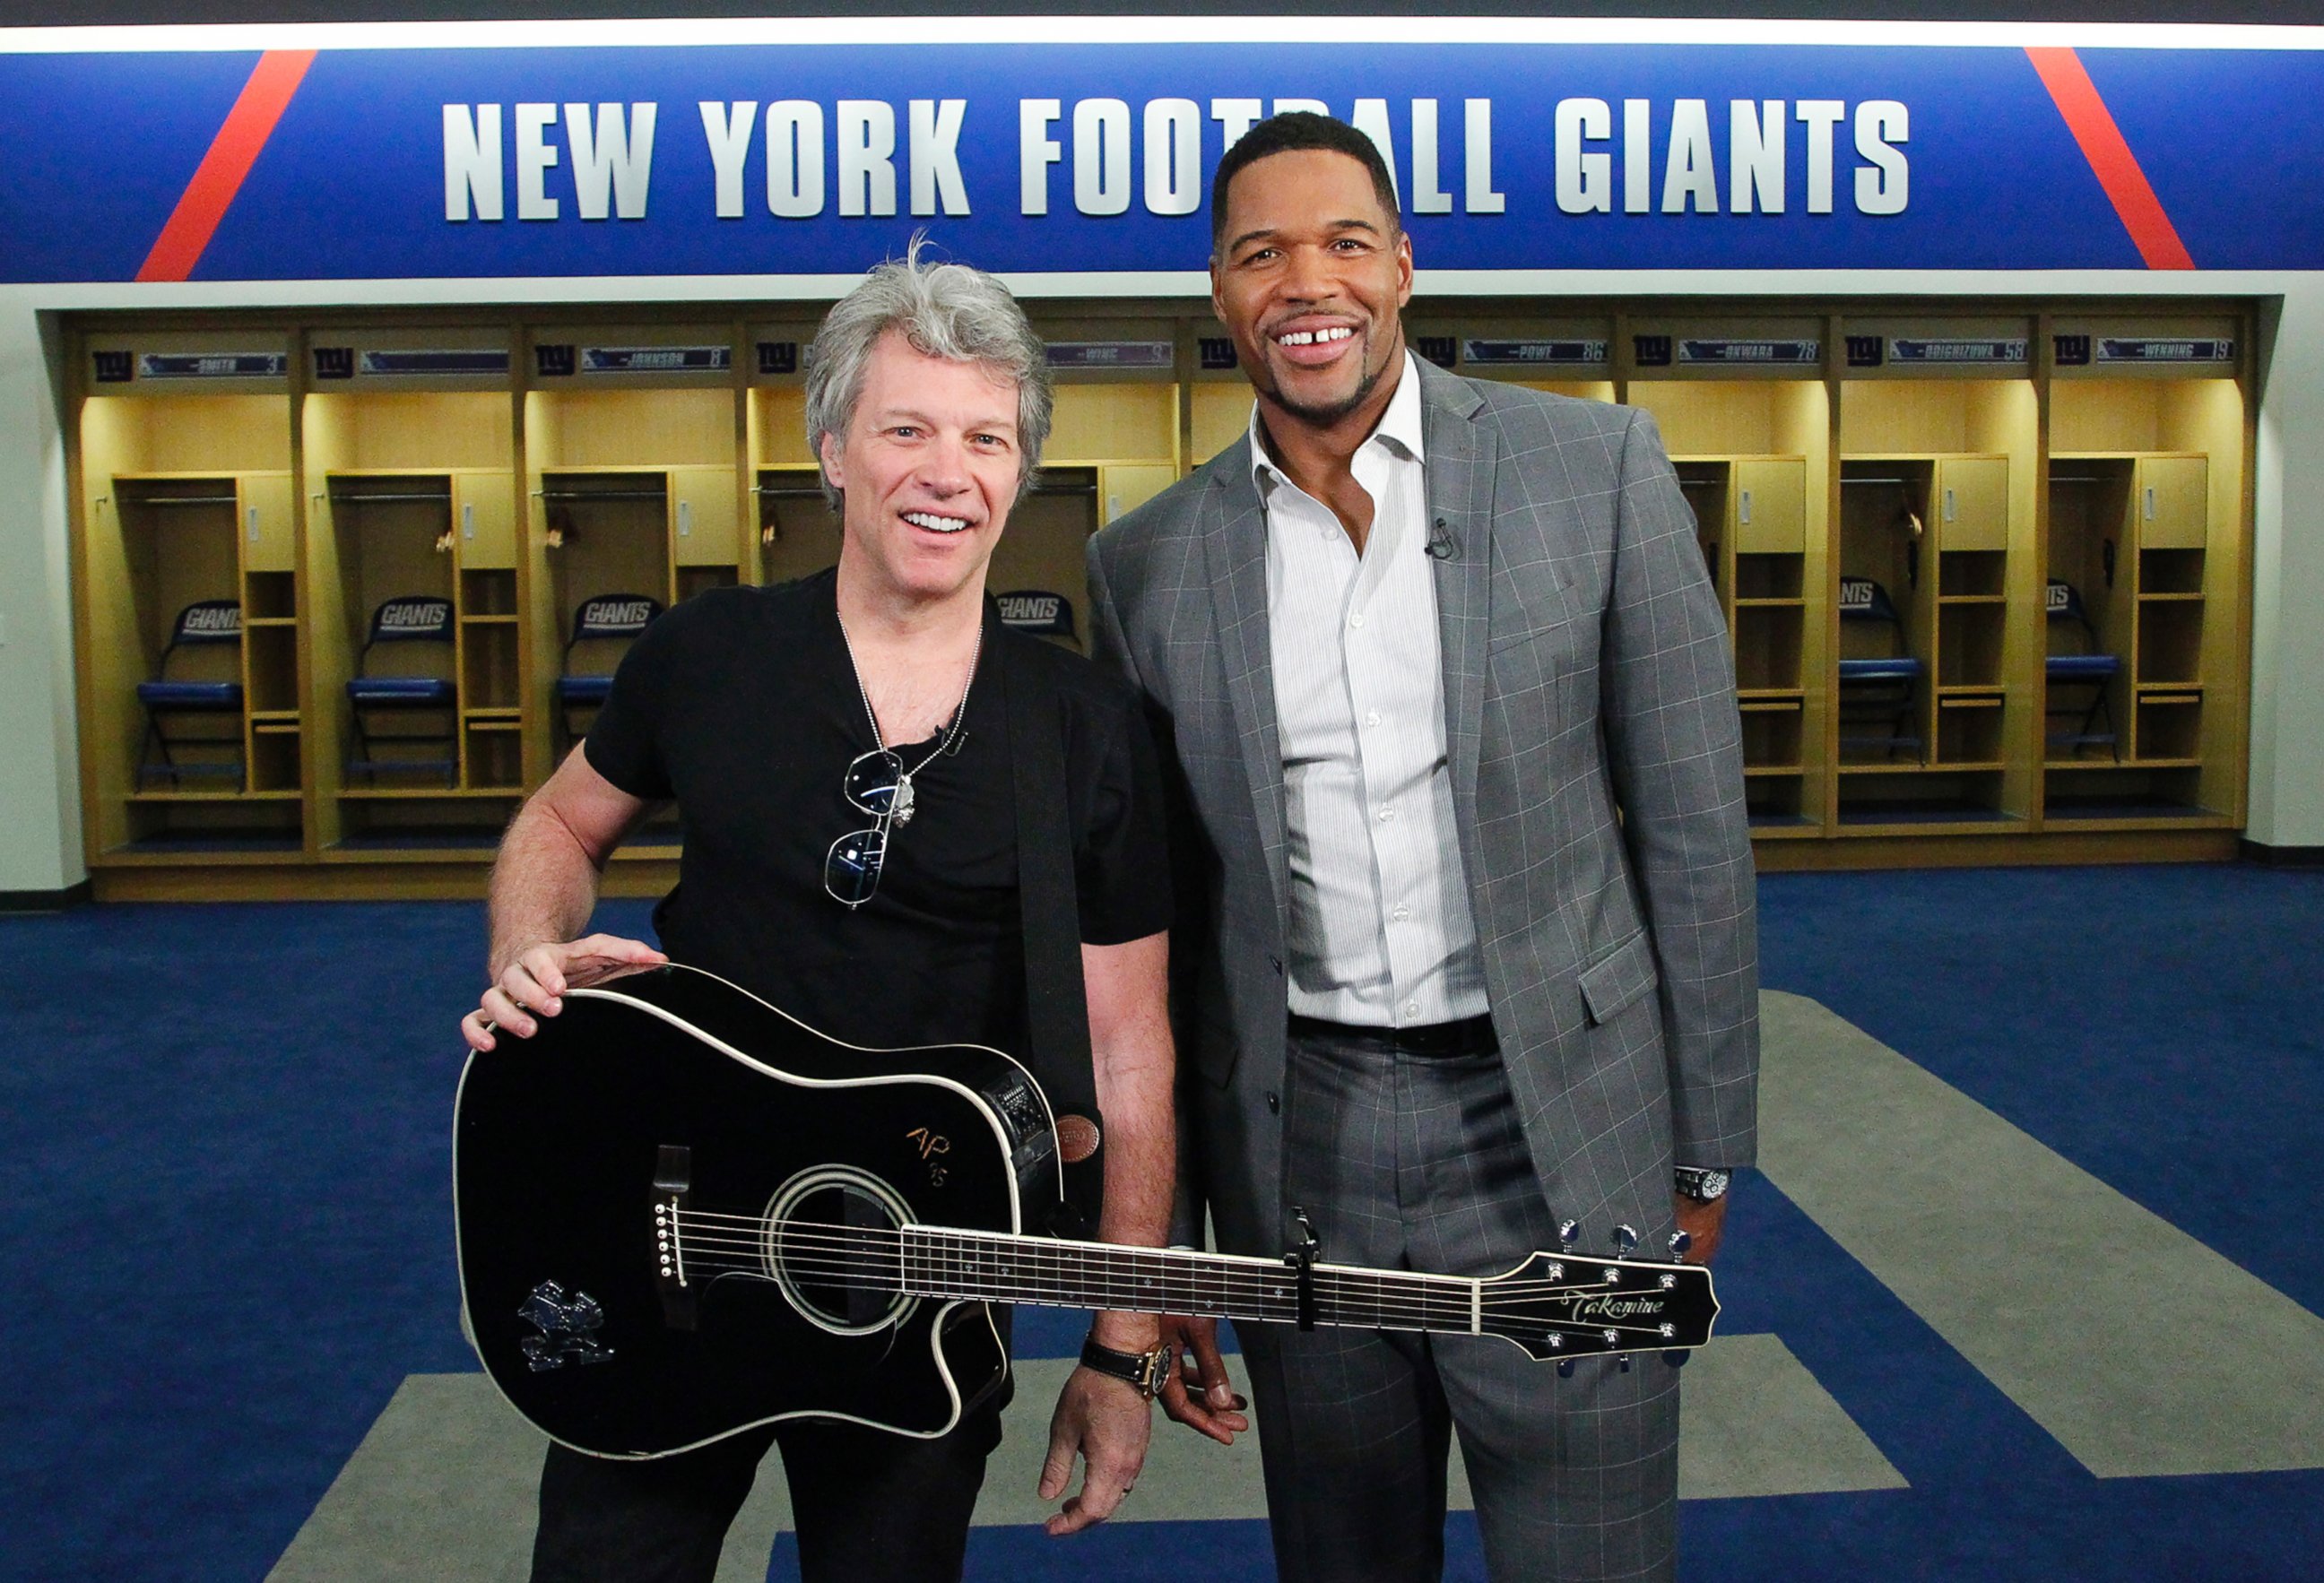 PHOTO: ABC News' Michael Strahan, right, joined Jon Bon Jovi at MetLife Stadium in New Jersey as the rock singer surprised the graduating class at Fairleigh Dickinson University commencement with a performance.